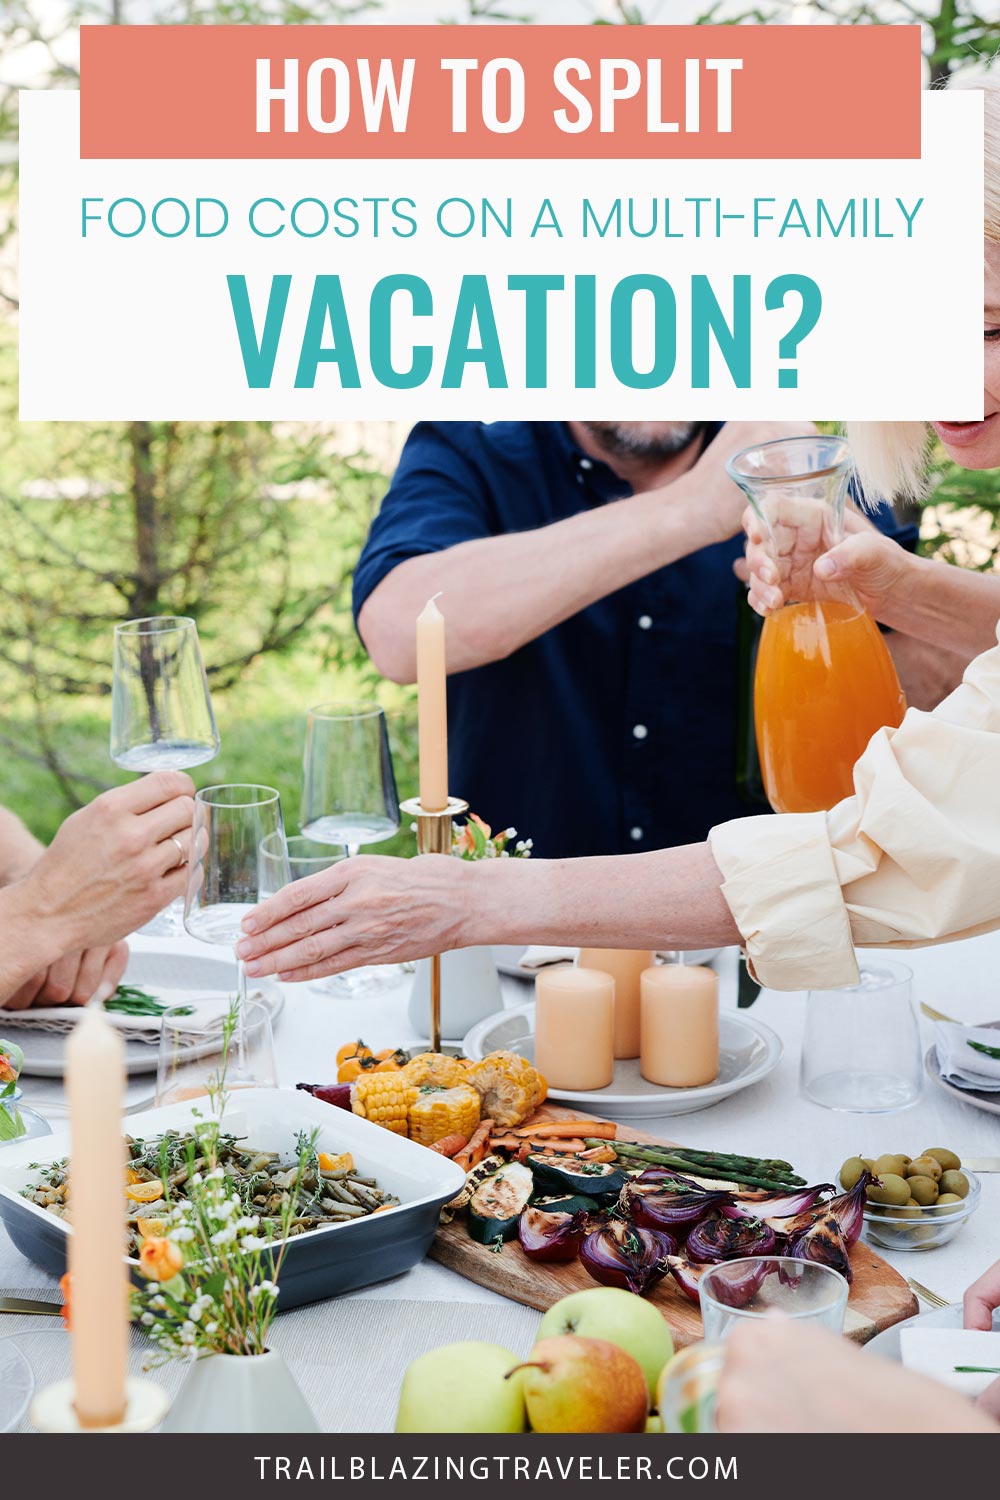 How To Split Food Costs On A Multi-Family Vacation?